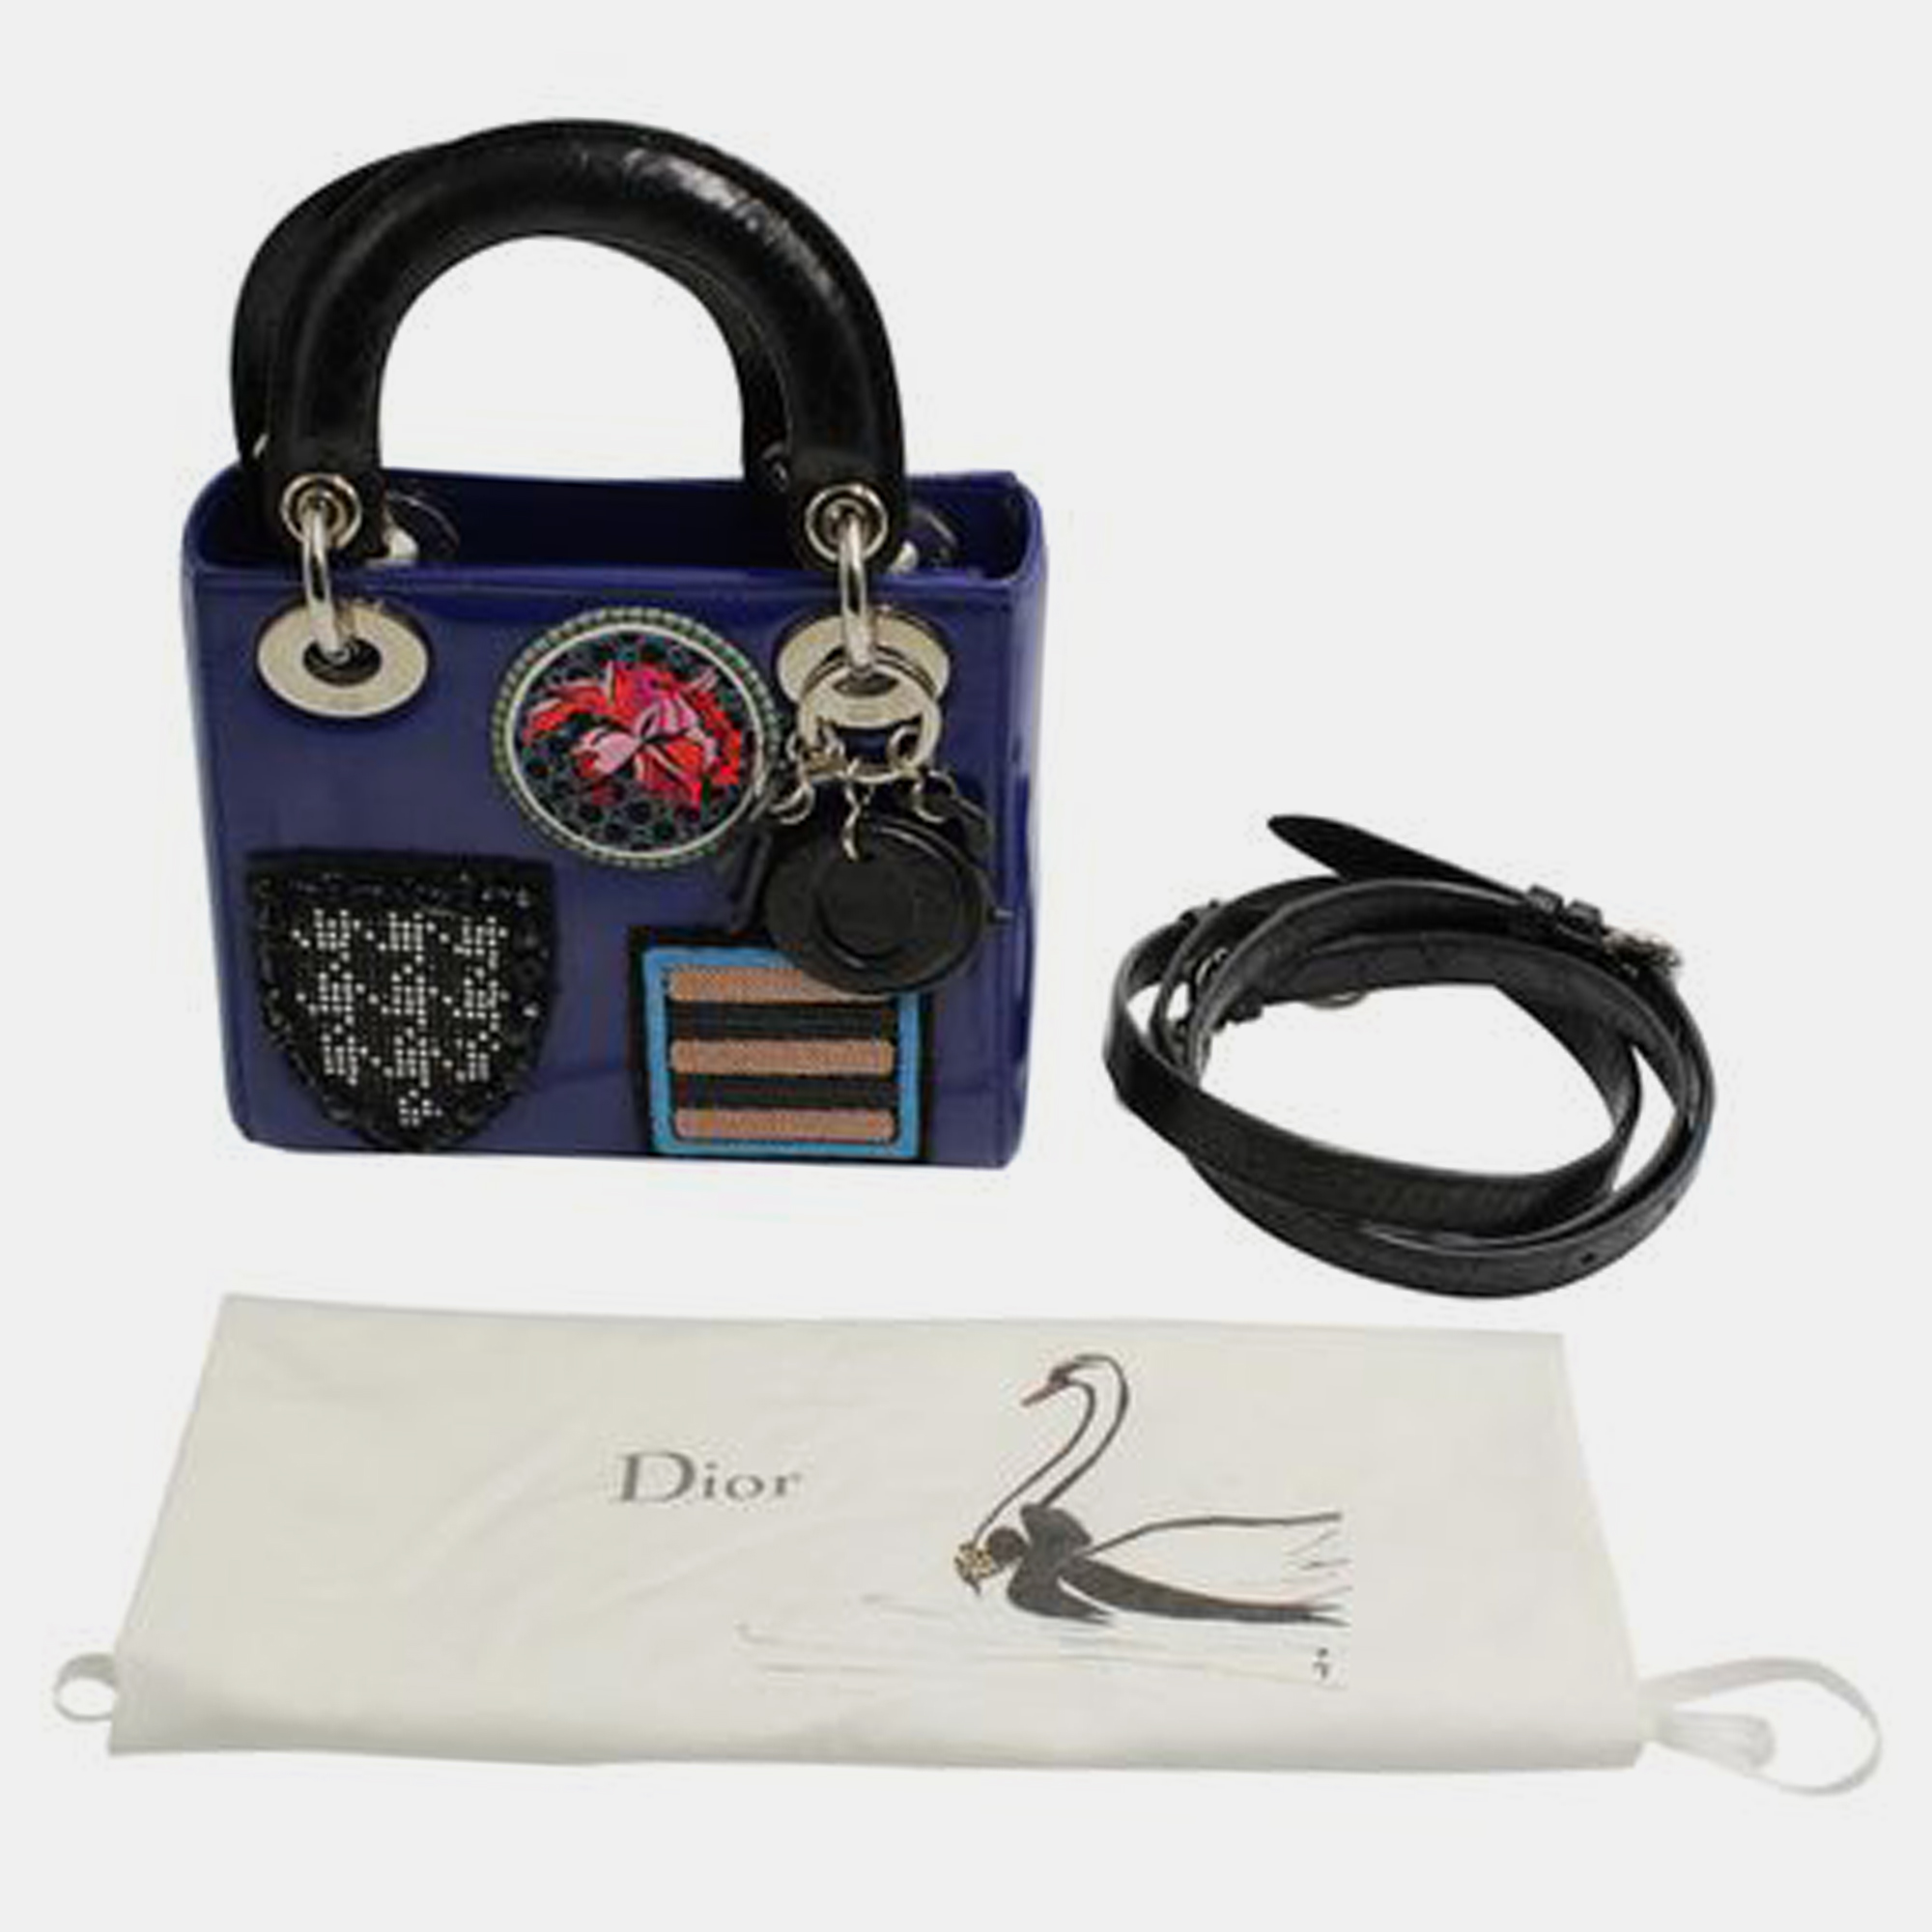 DIOR Mini Lady Dior Bag With Embroidered Badges - Limited Edition SS2014 HANDBAGS